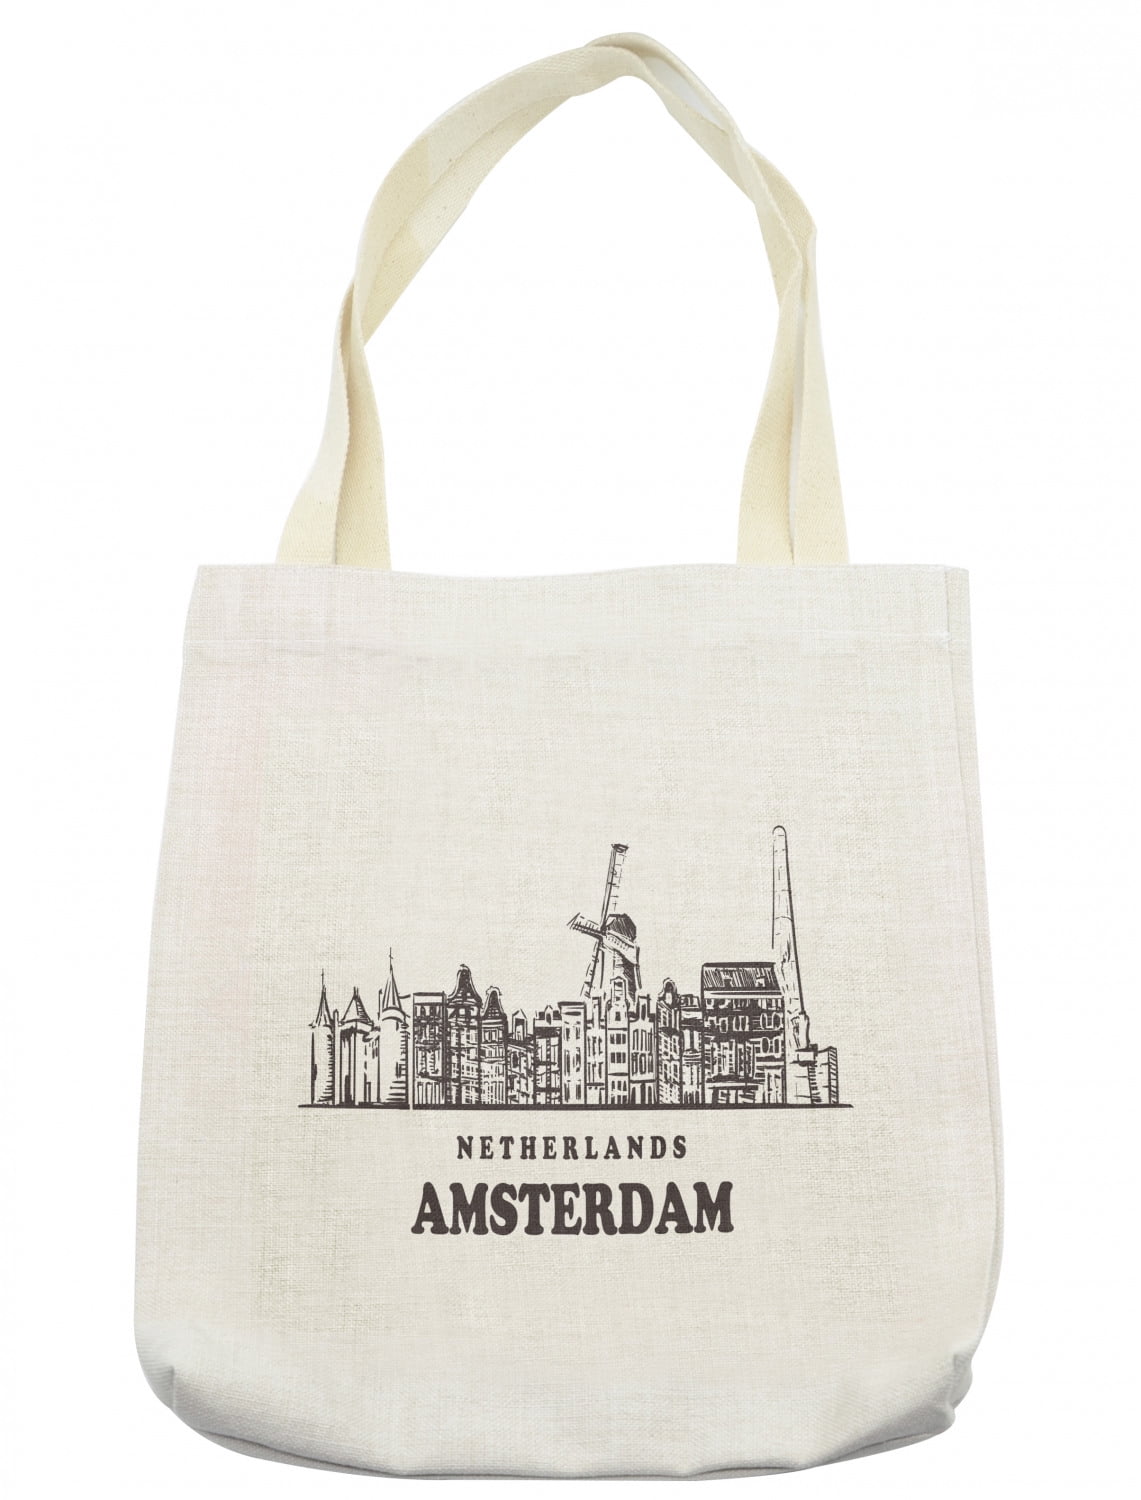 Amsterdam Tote Bag, Netherlands Calligraphy Horizontal City Skyline on a Plain Background, Cloth Linen Reusable Bag for Shopping Books Beach and More, 16.5" X 14", Cream, by Ambesonne - Walmart.com